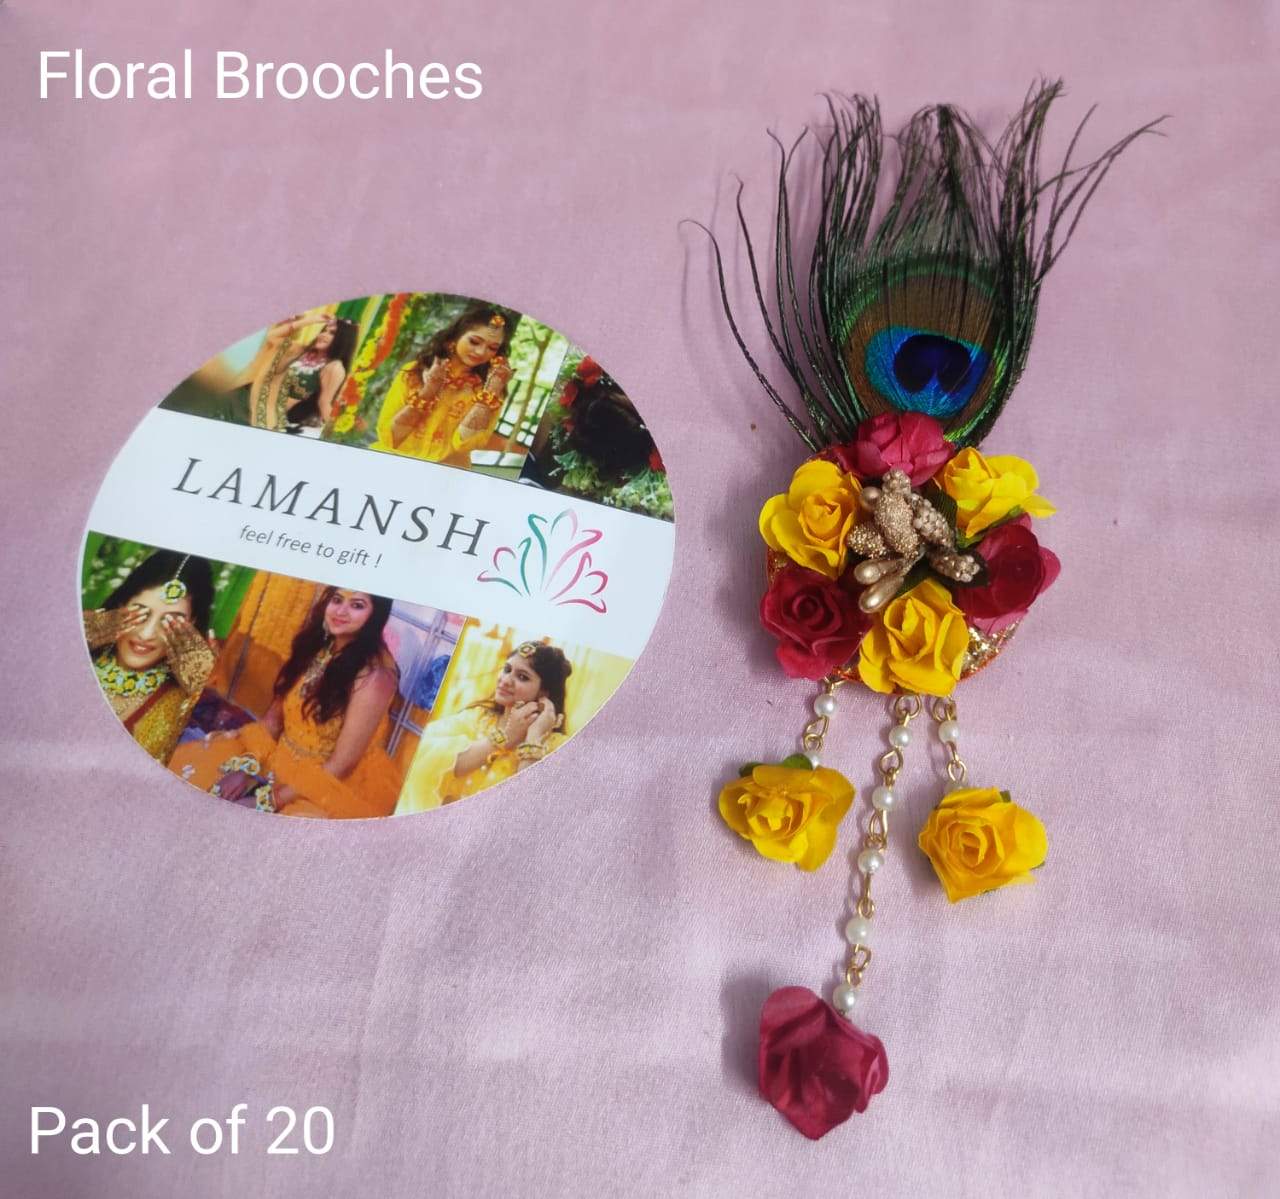 LAMANSH Floral 🌺 Giveaways Yellow-Red / Set of 25 Broaches LAMANSH® Artificial Flower Brooches Broaches  / Bridesmaid Giveaways ( Set of 25 ) set